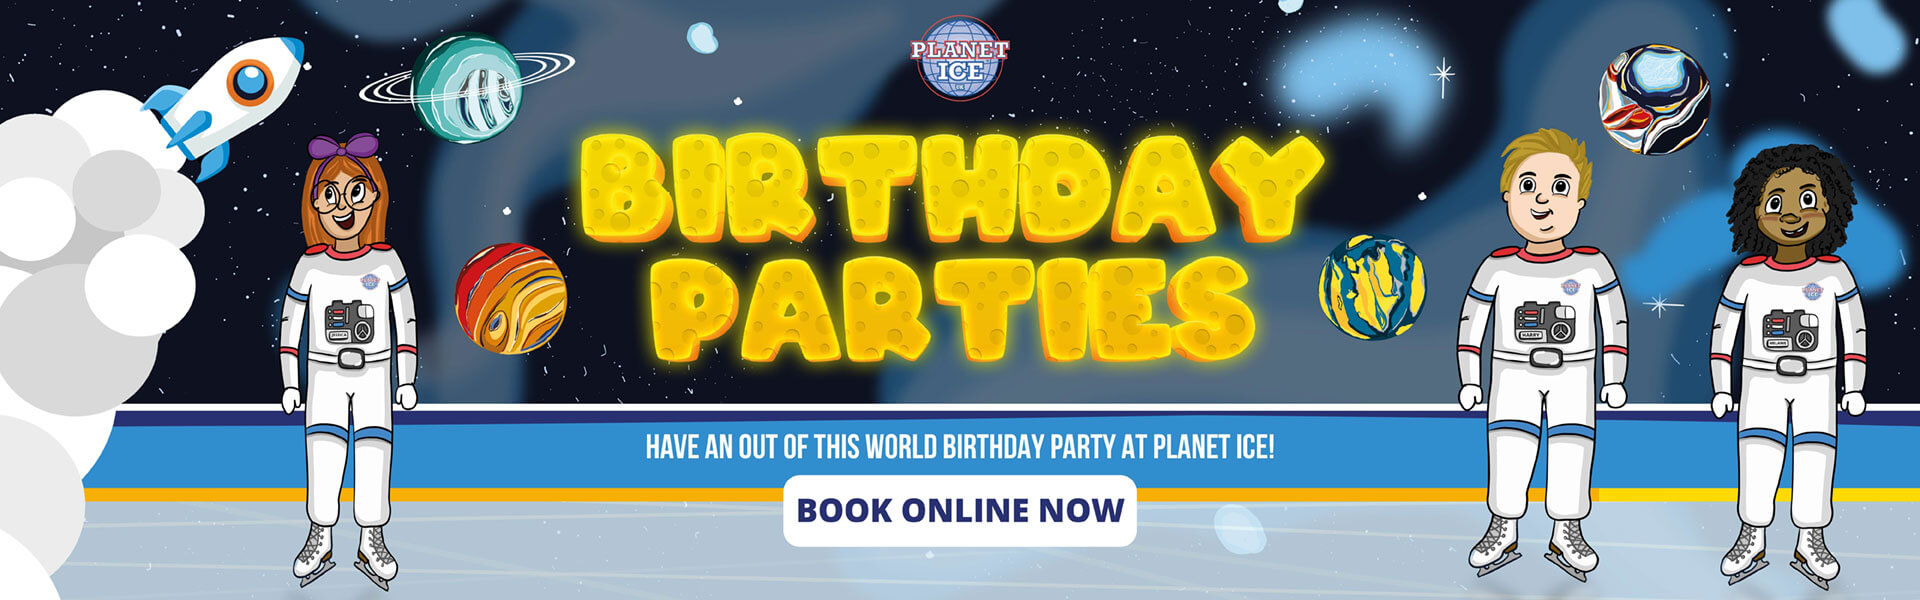 Birthday party characters for Planet Ice. 3 Characters in astronaut white suits on ice, with two floating in space with big text reading 'Out of this world birthday parties', with 'book online now' underneath.